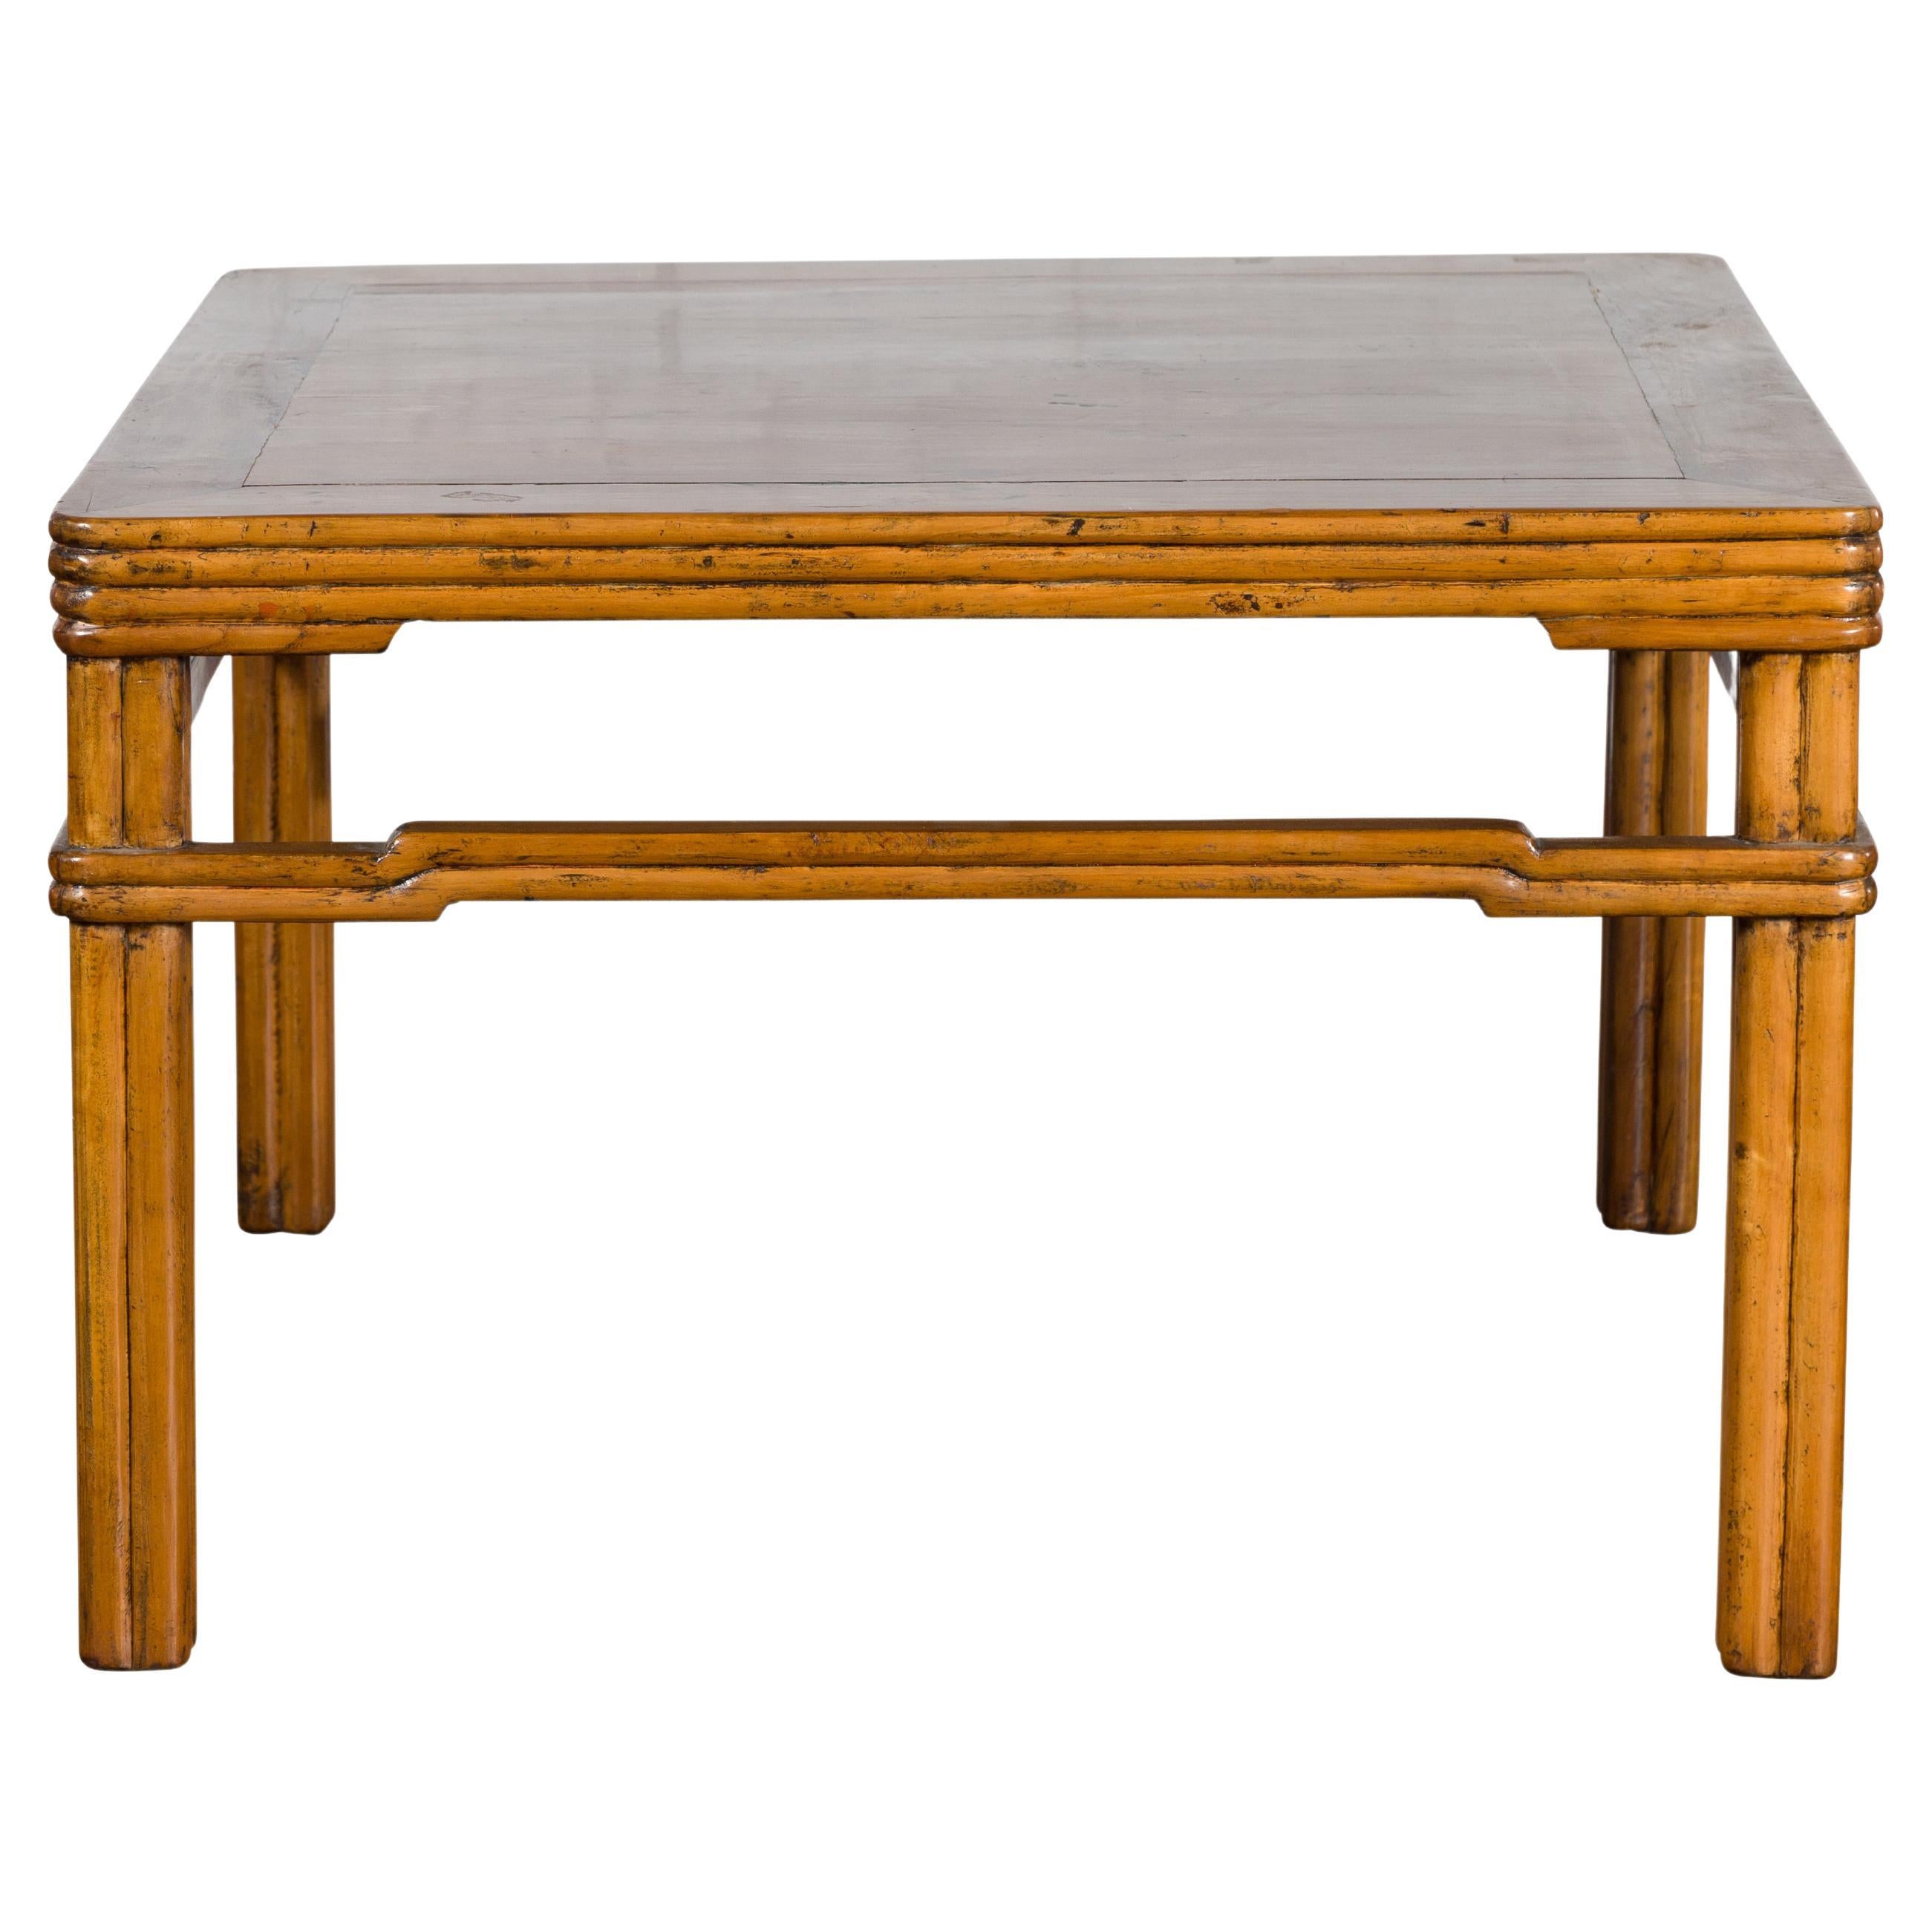 Chinese Early 20th Century Light Brown Low Side Table with Humpback Stretchers